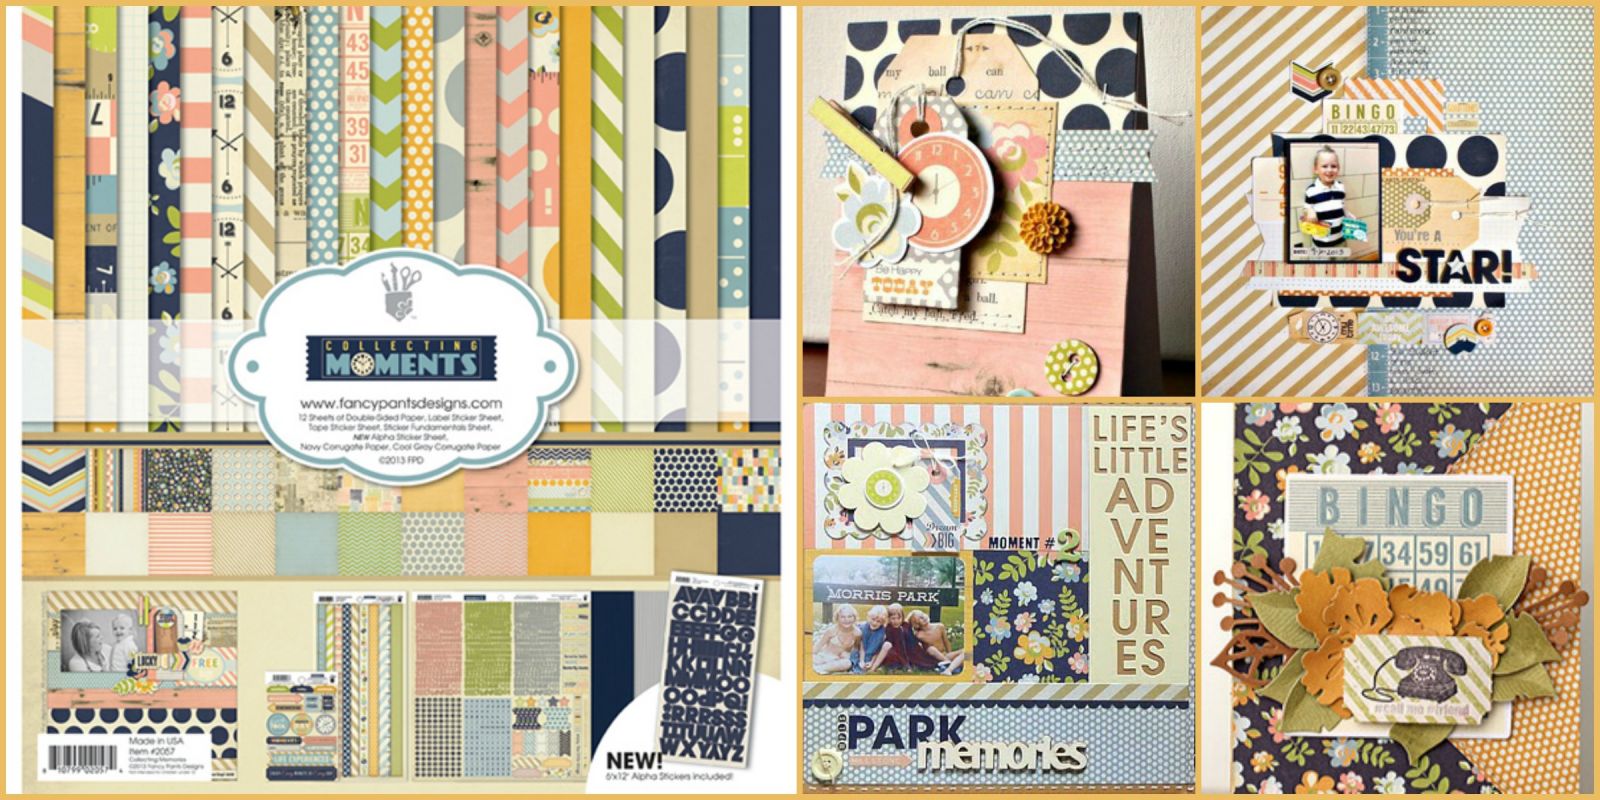 Collecting Moments Scrapbooking Kit